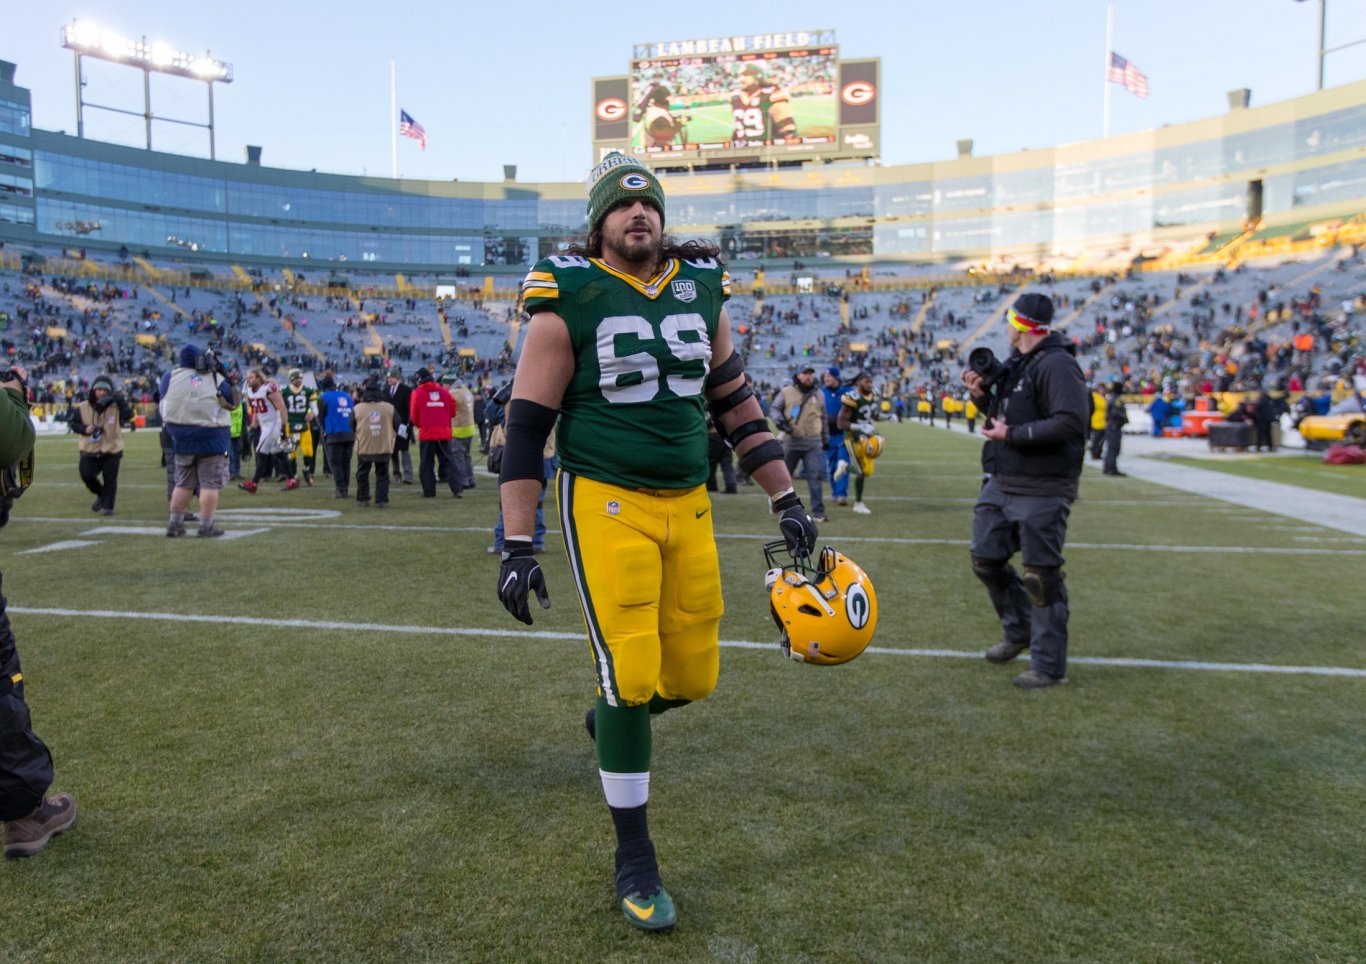 Gutekunst: Bakhtiari an important part of what the Packers do